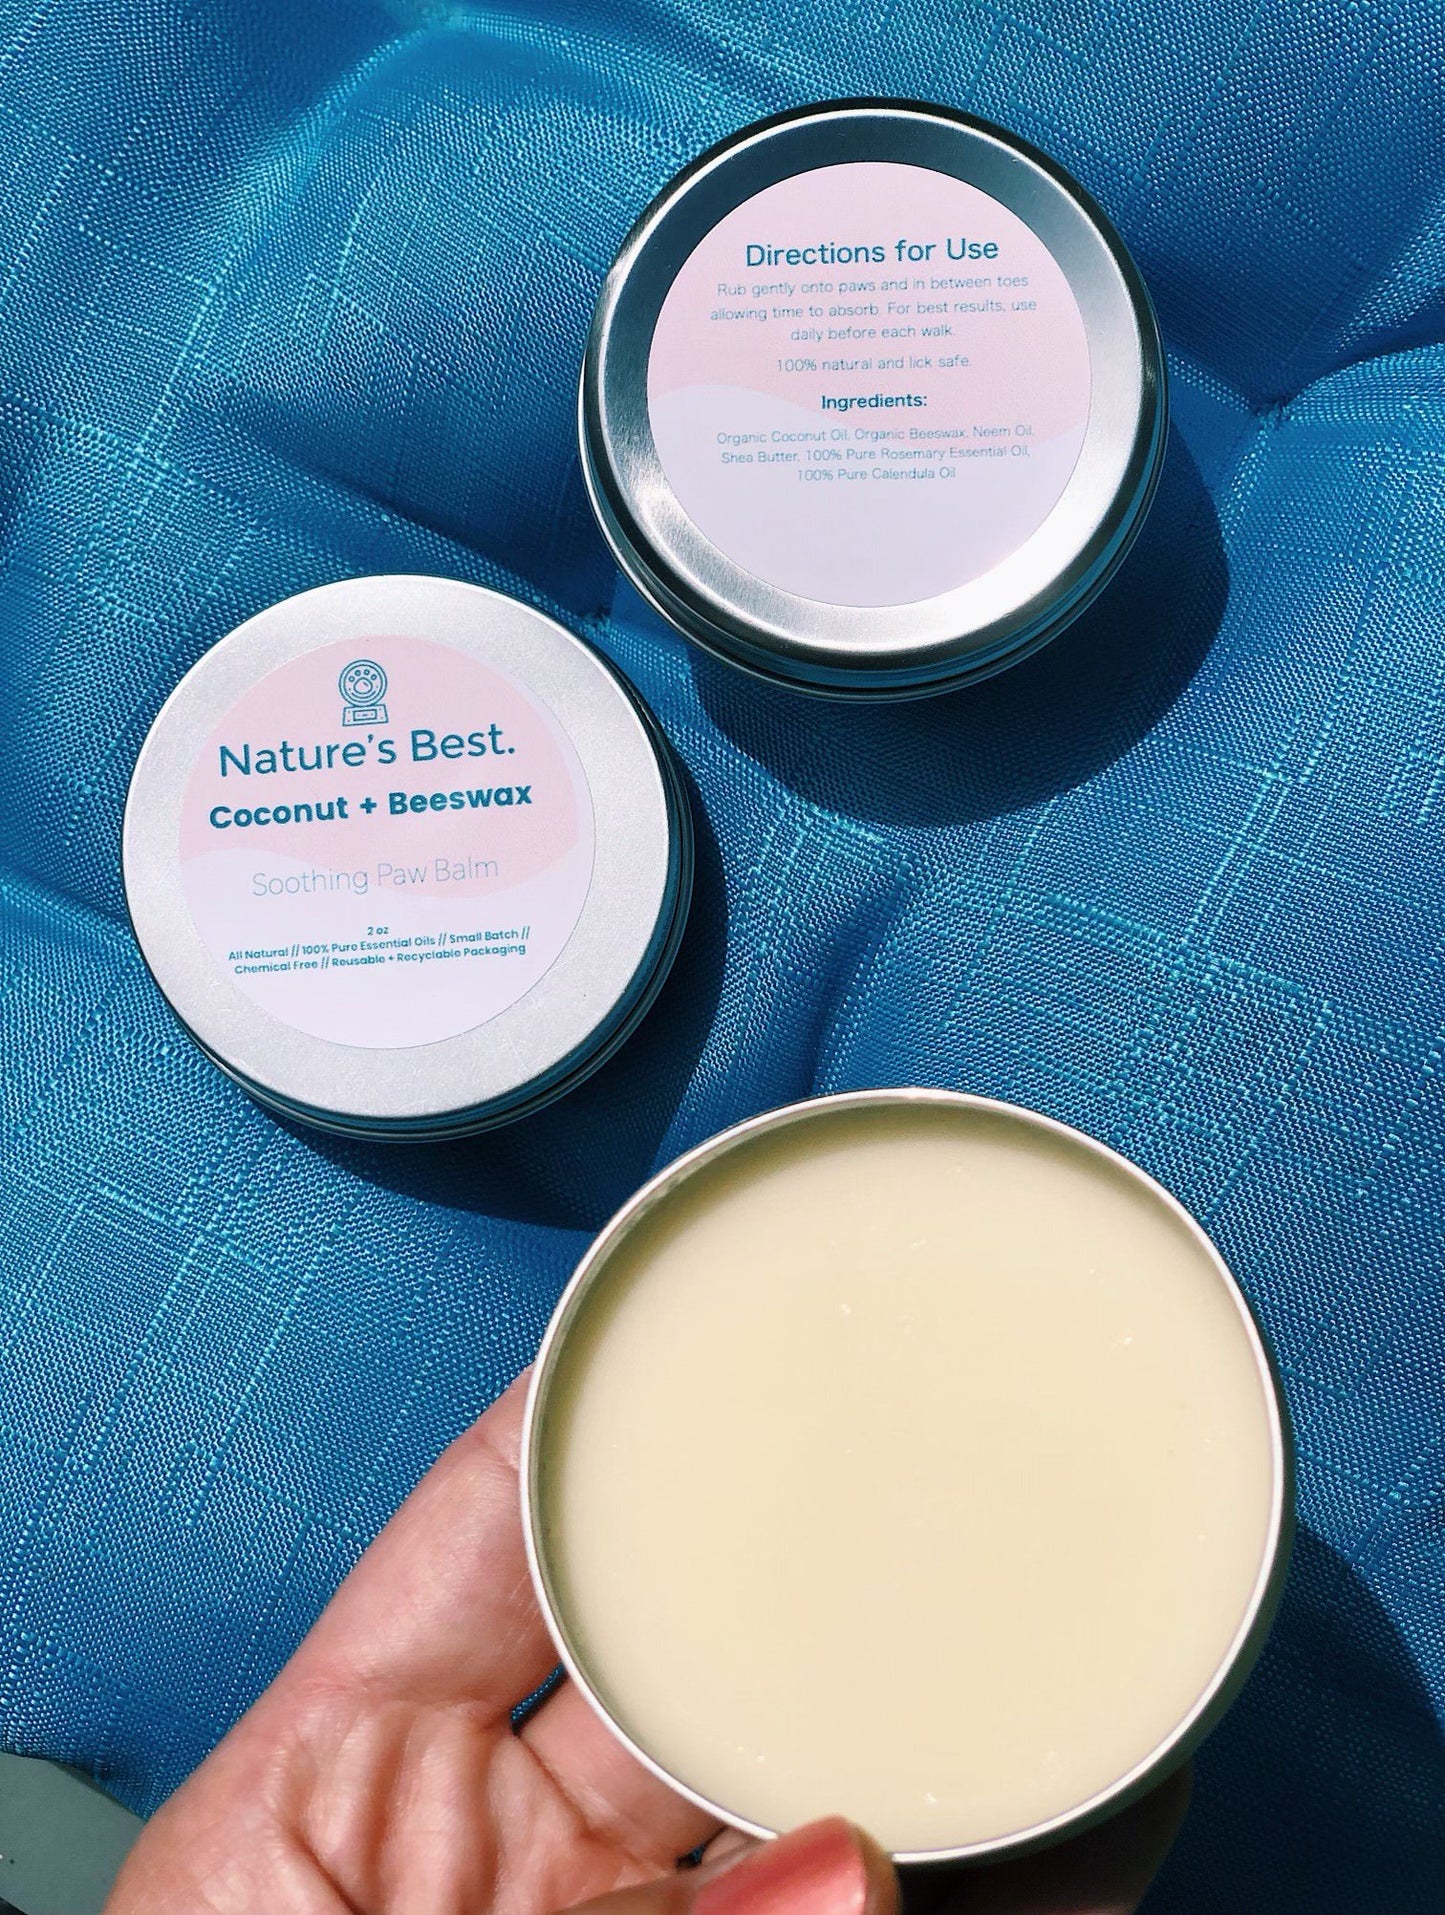 Coconut + Beeswax Soothing Paw Balm